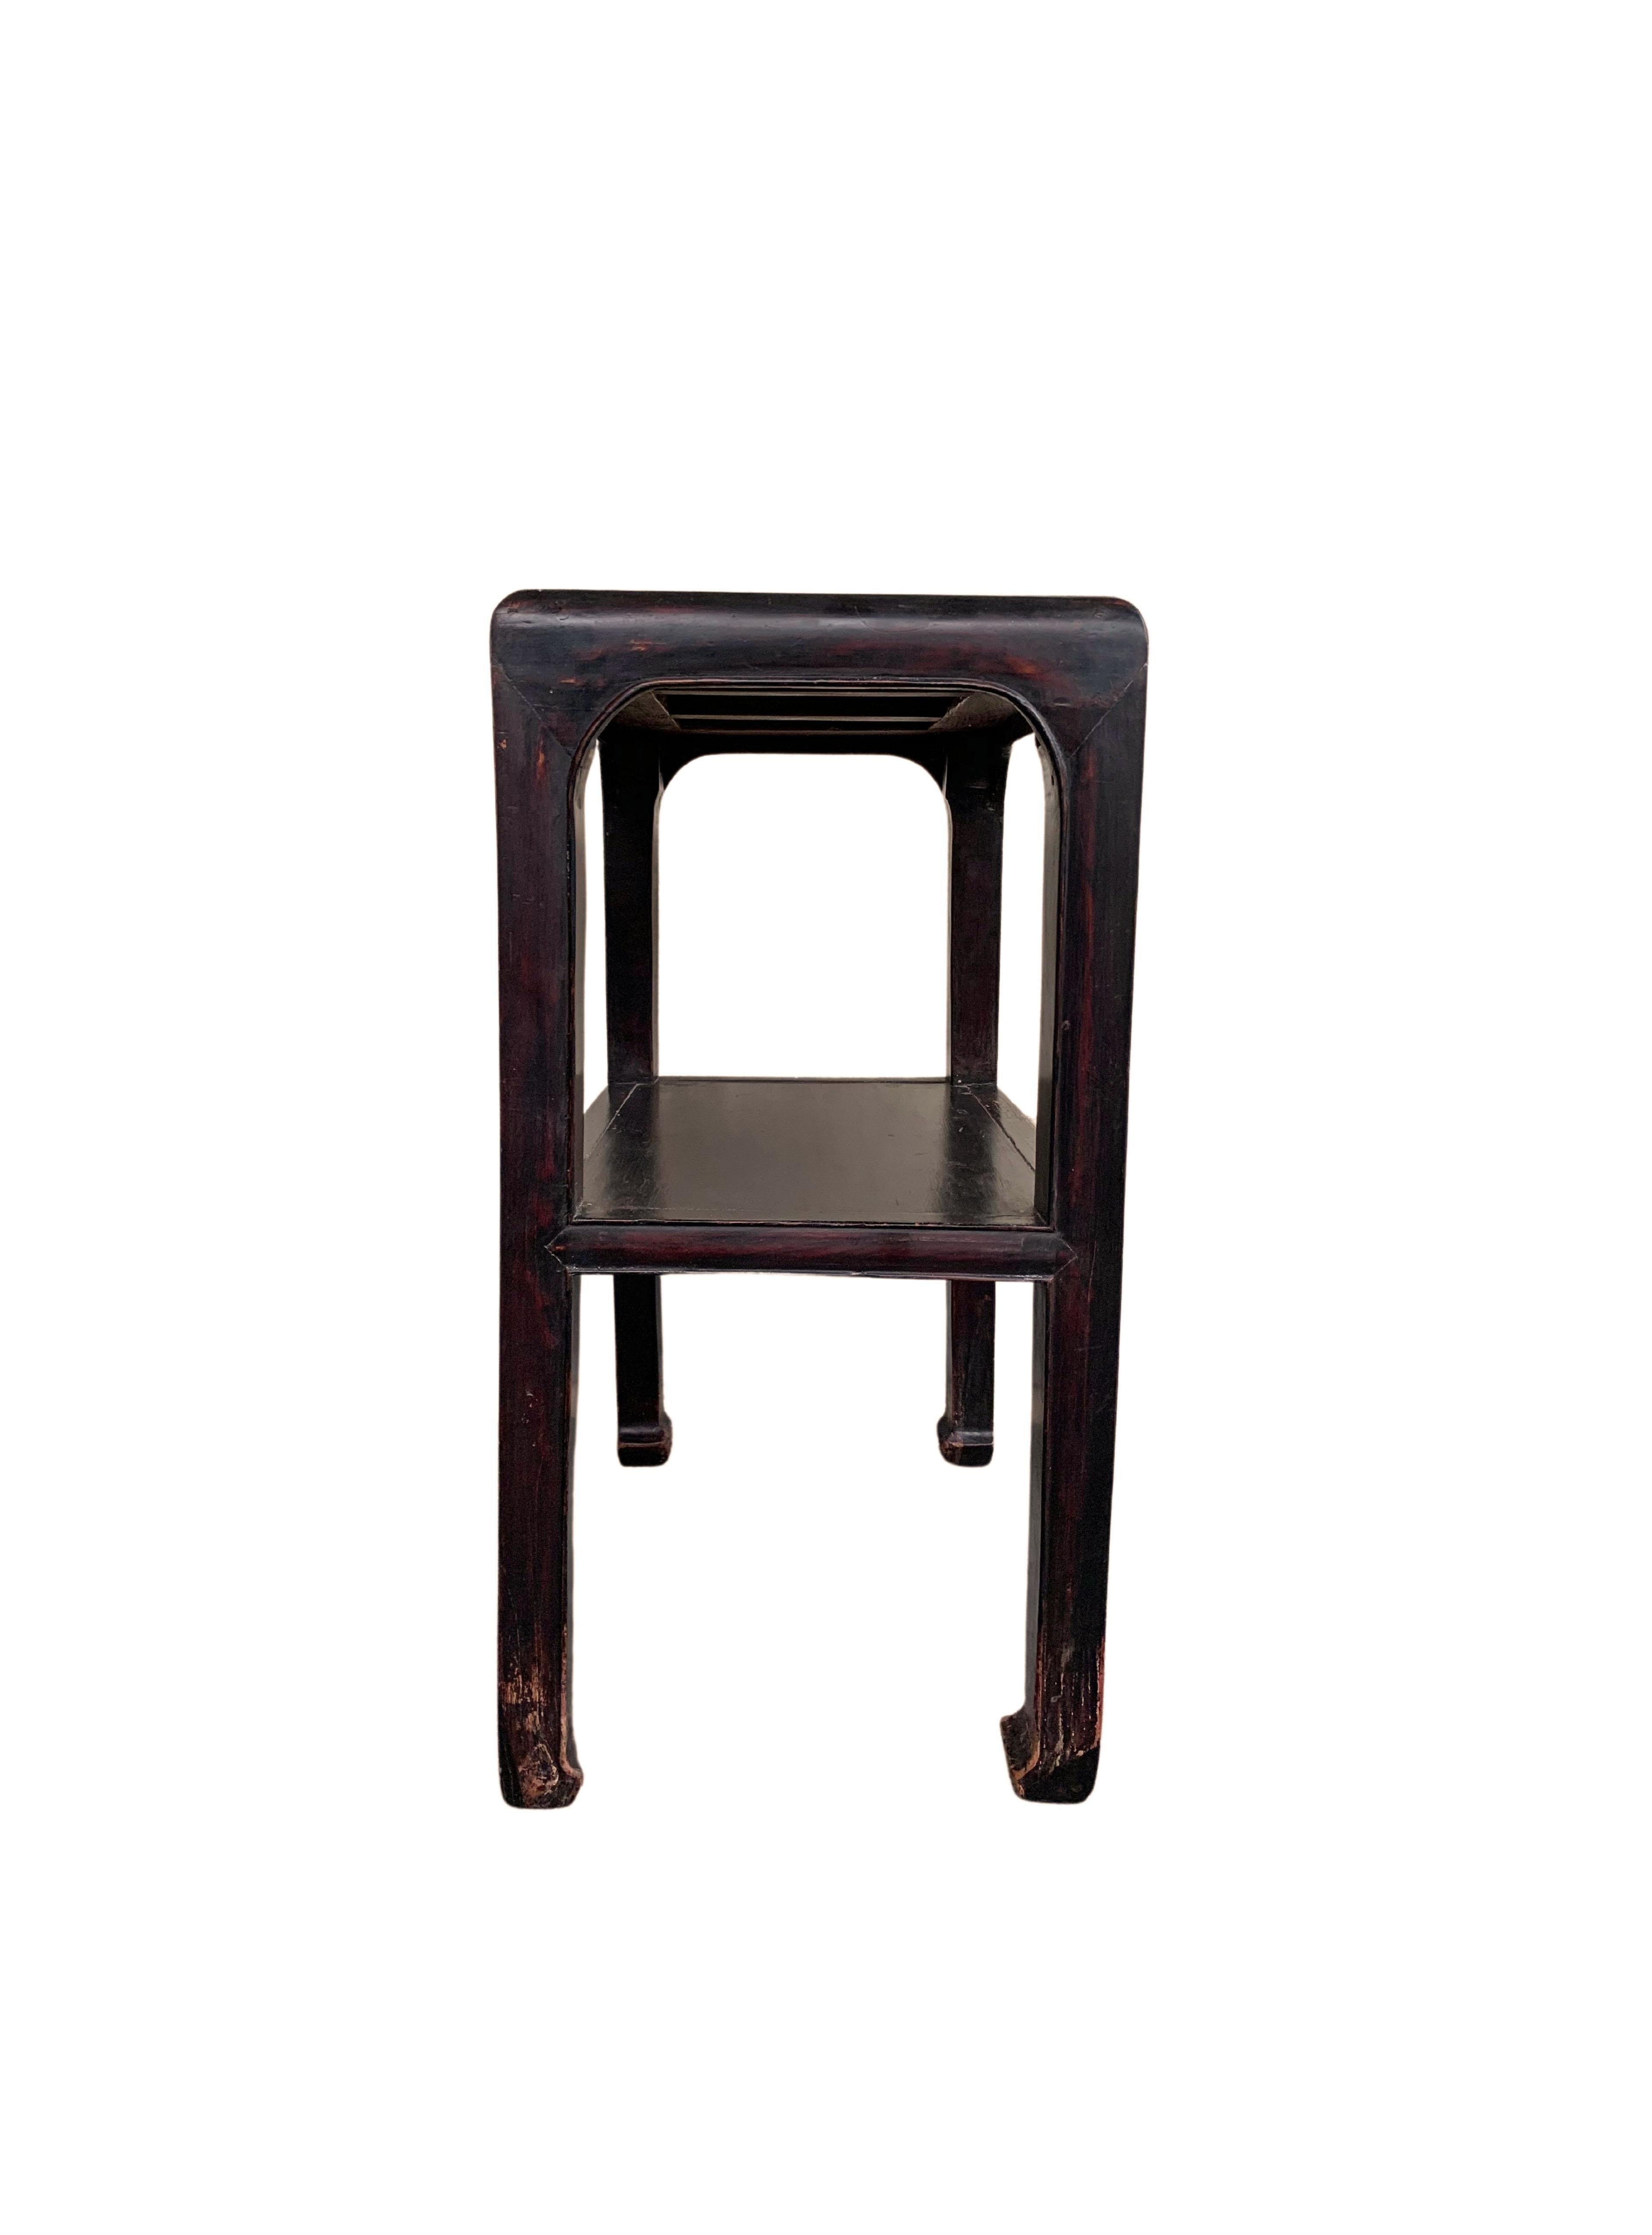 Chinese Lacquered Wooden Table with Curved Legs, c. 1950 For Sale 2